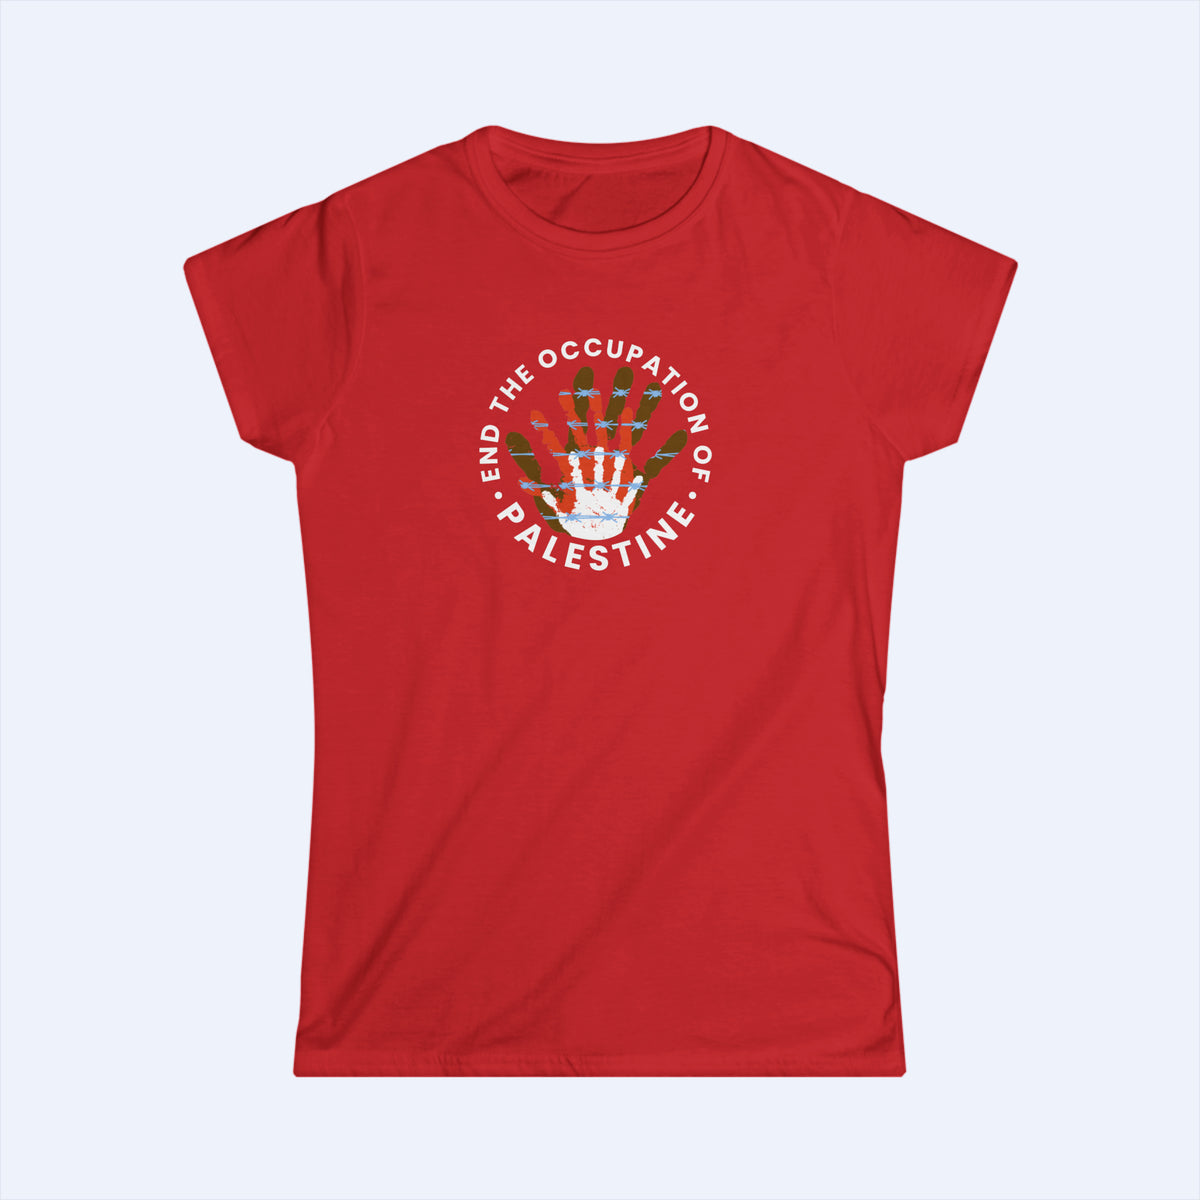 End Occupation Women DBK WH Tee